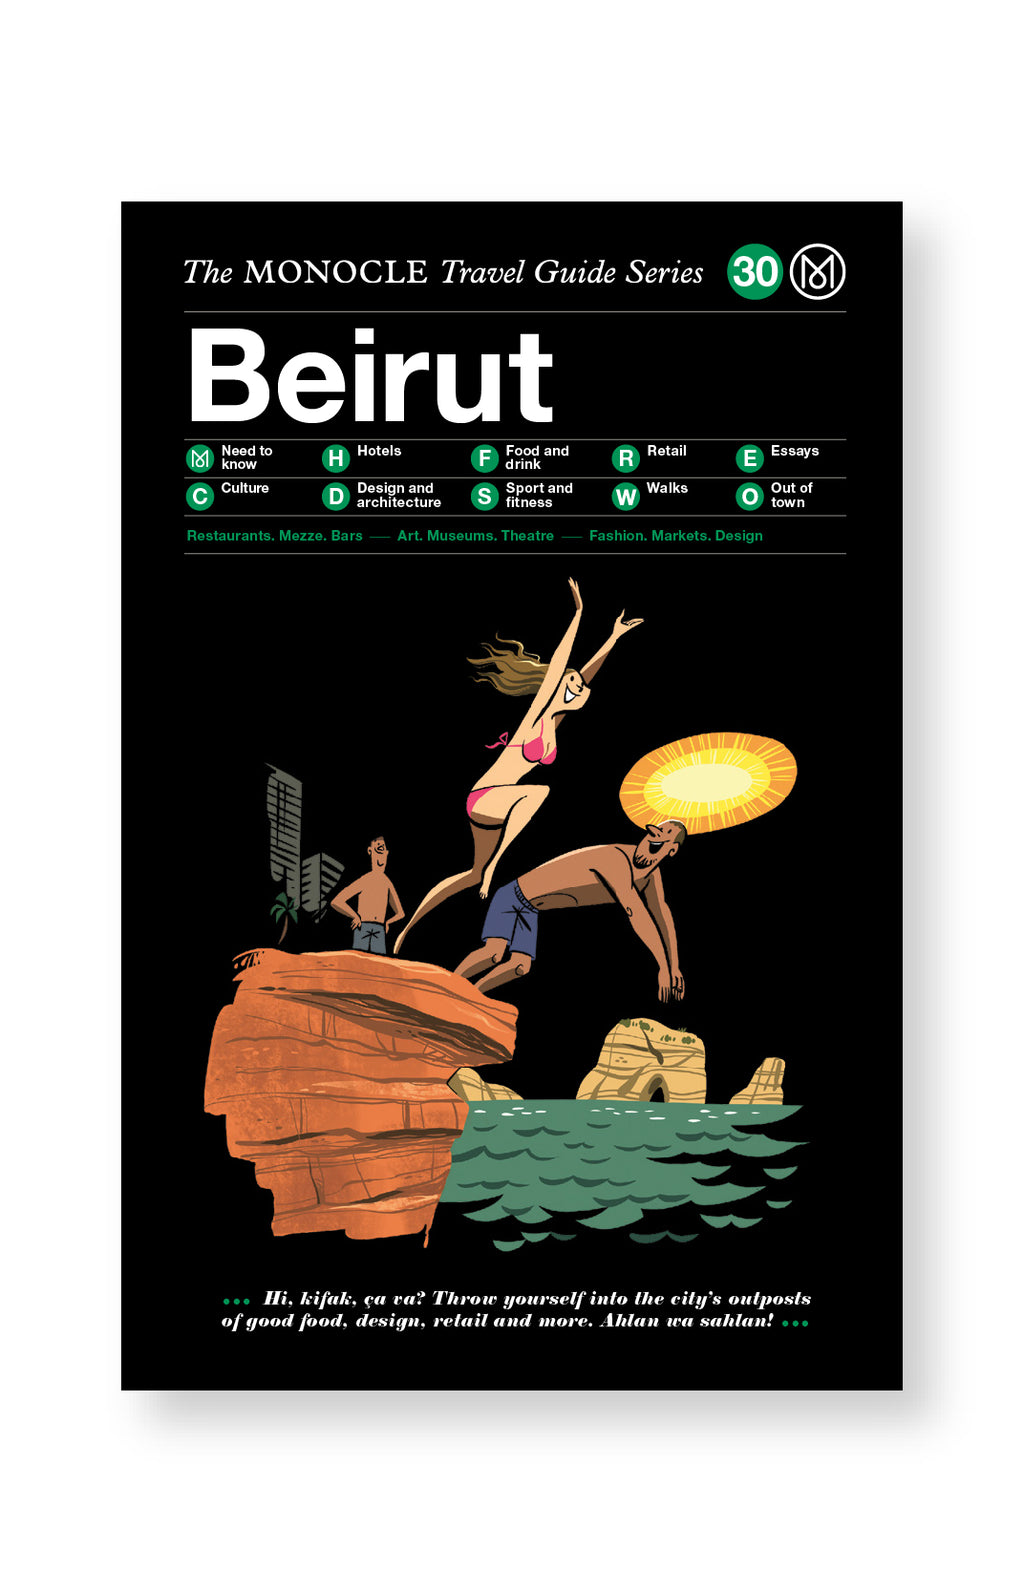 Beirut - The Monocle Travel Guide Series 30